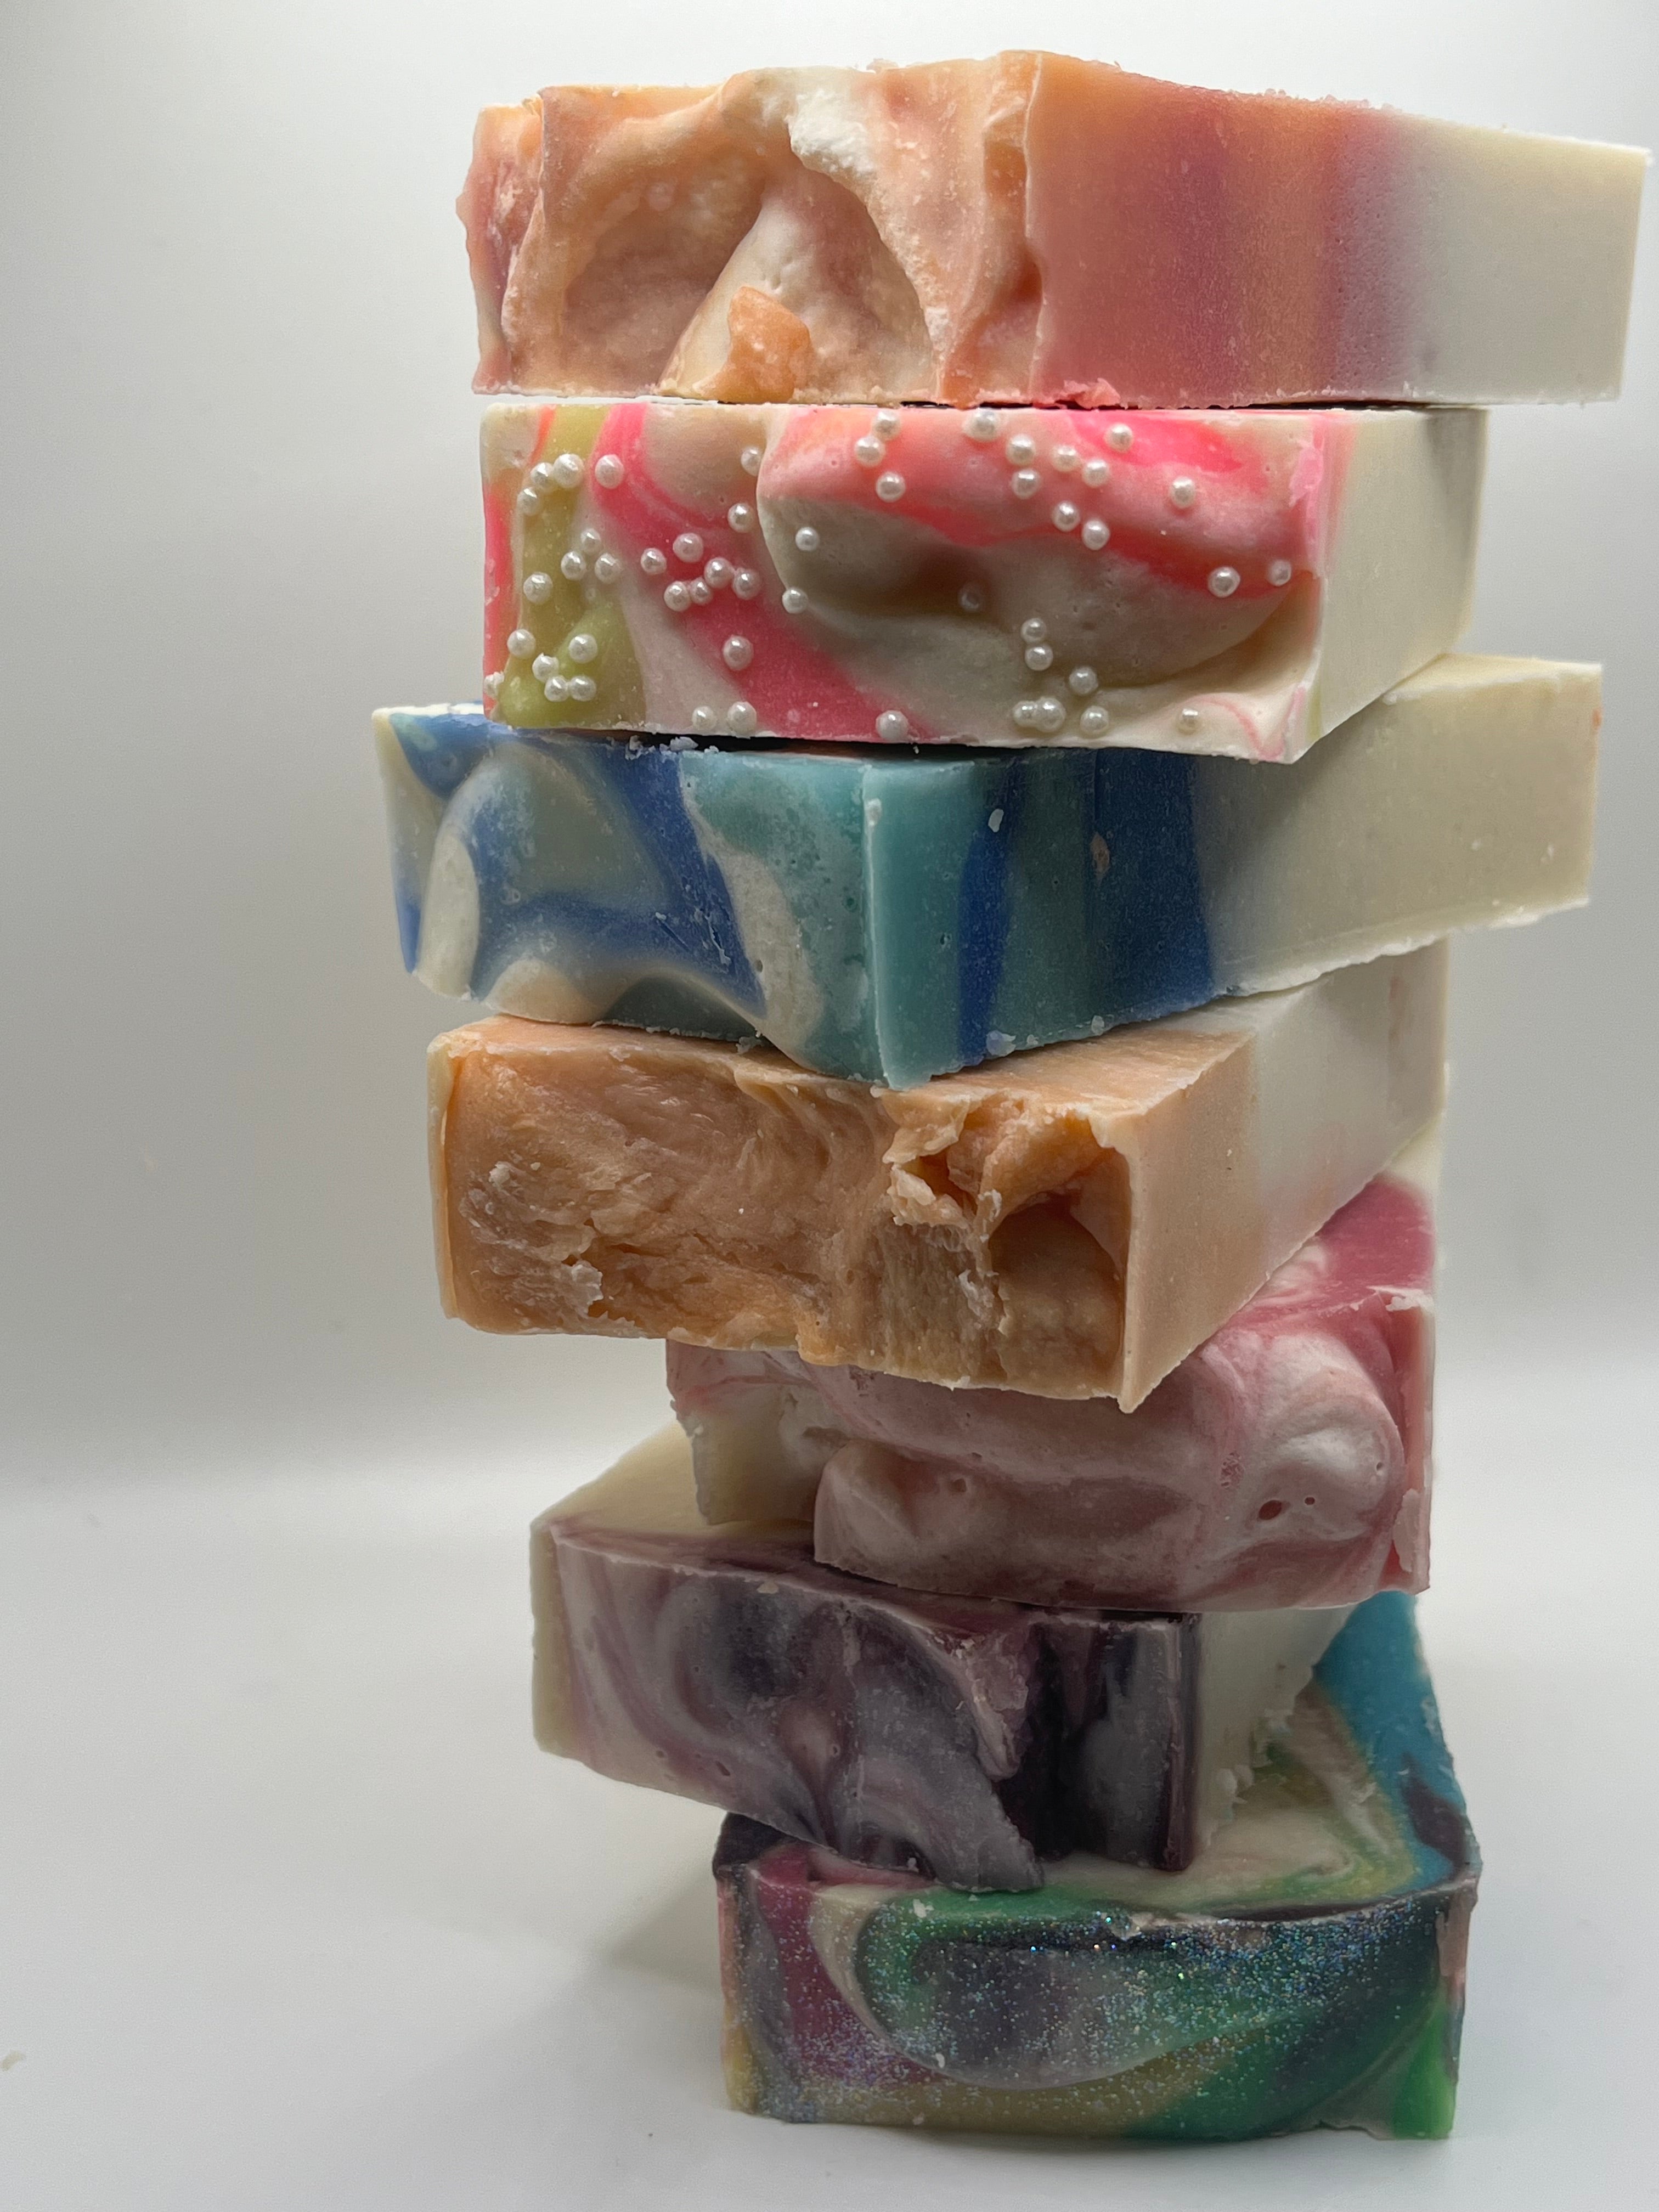 Soap – Sanders and Hardy Pure Body